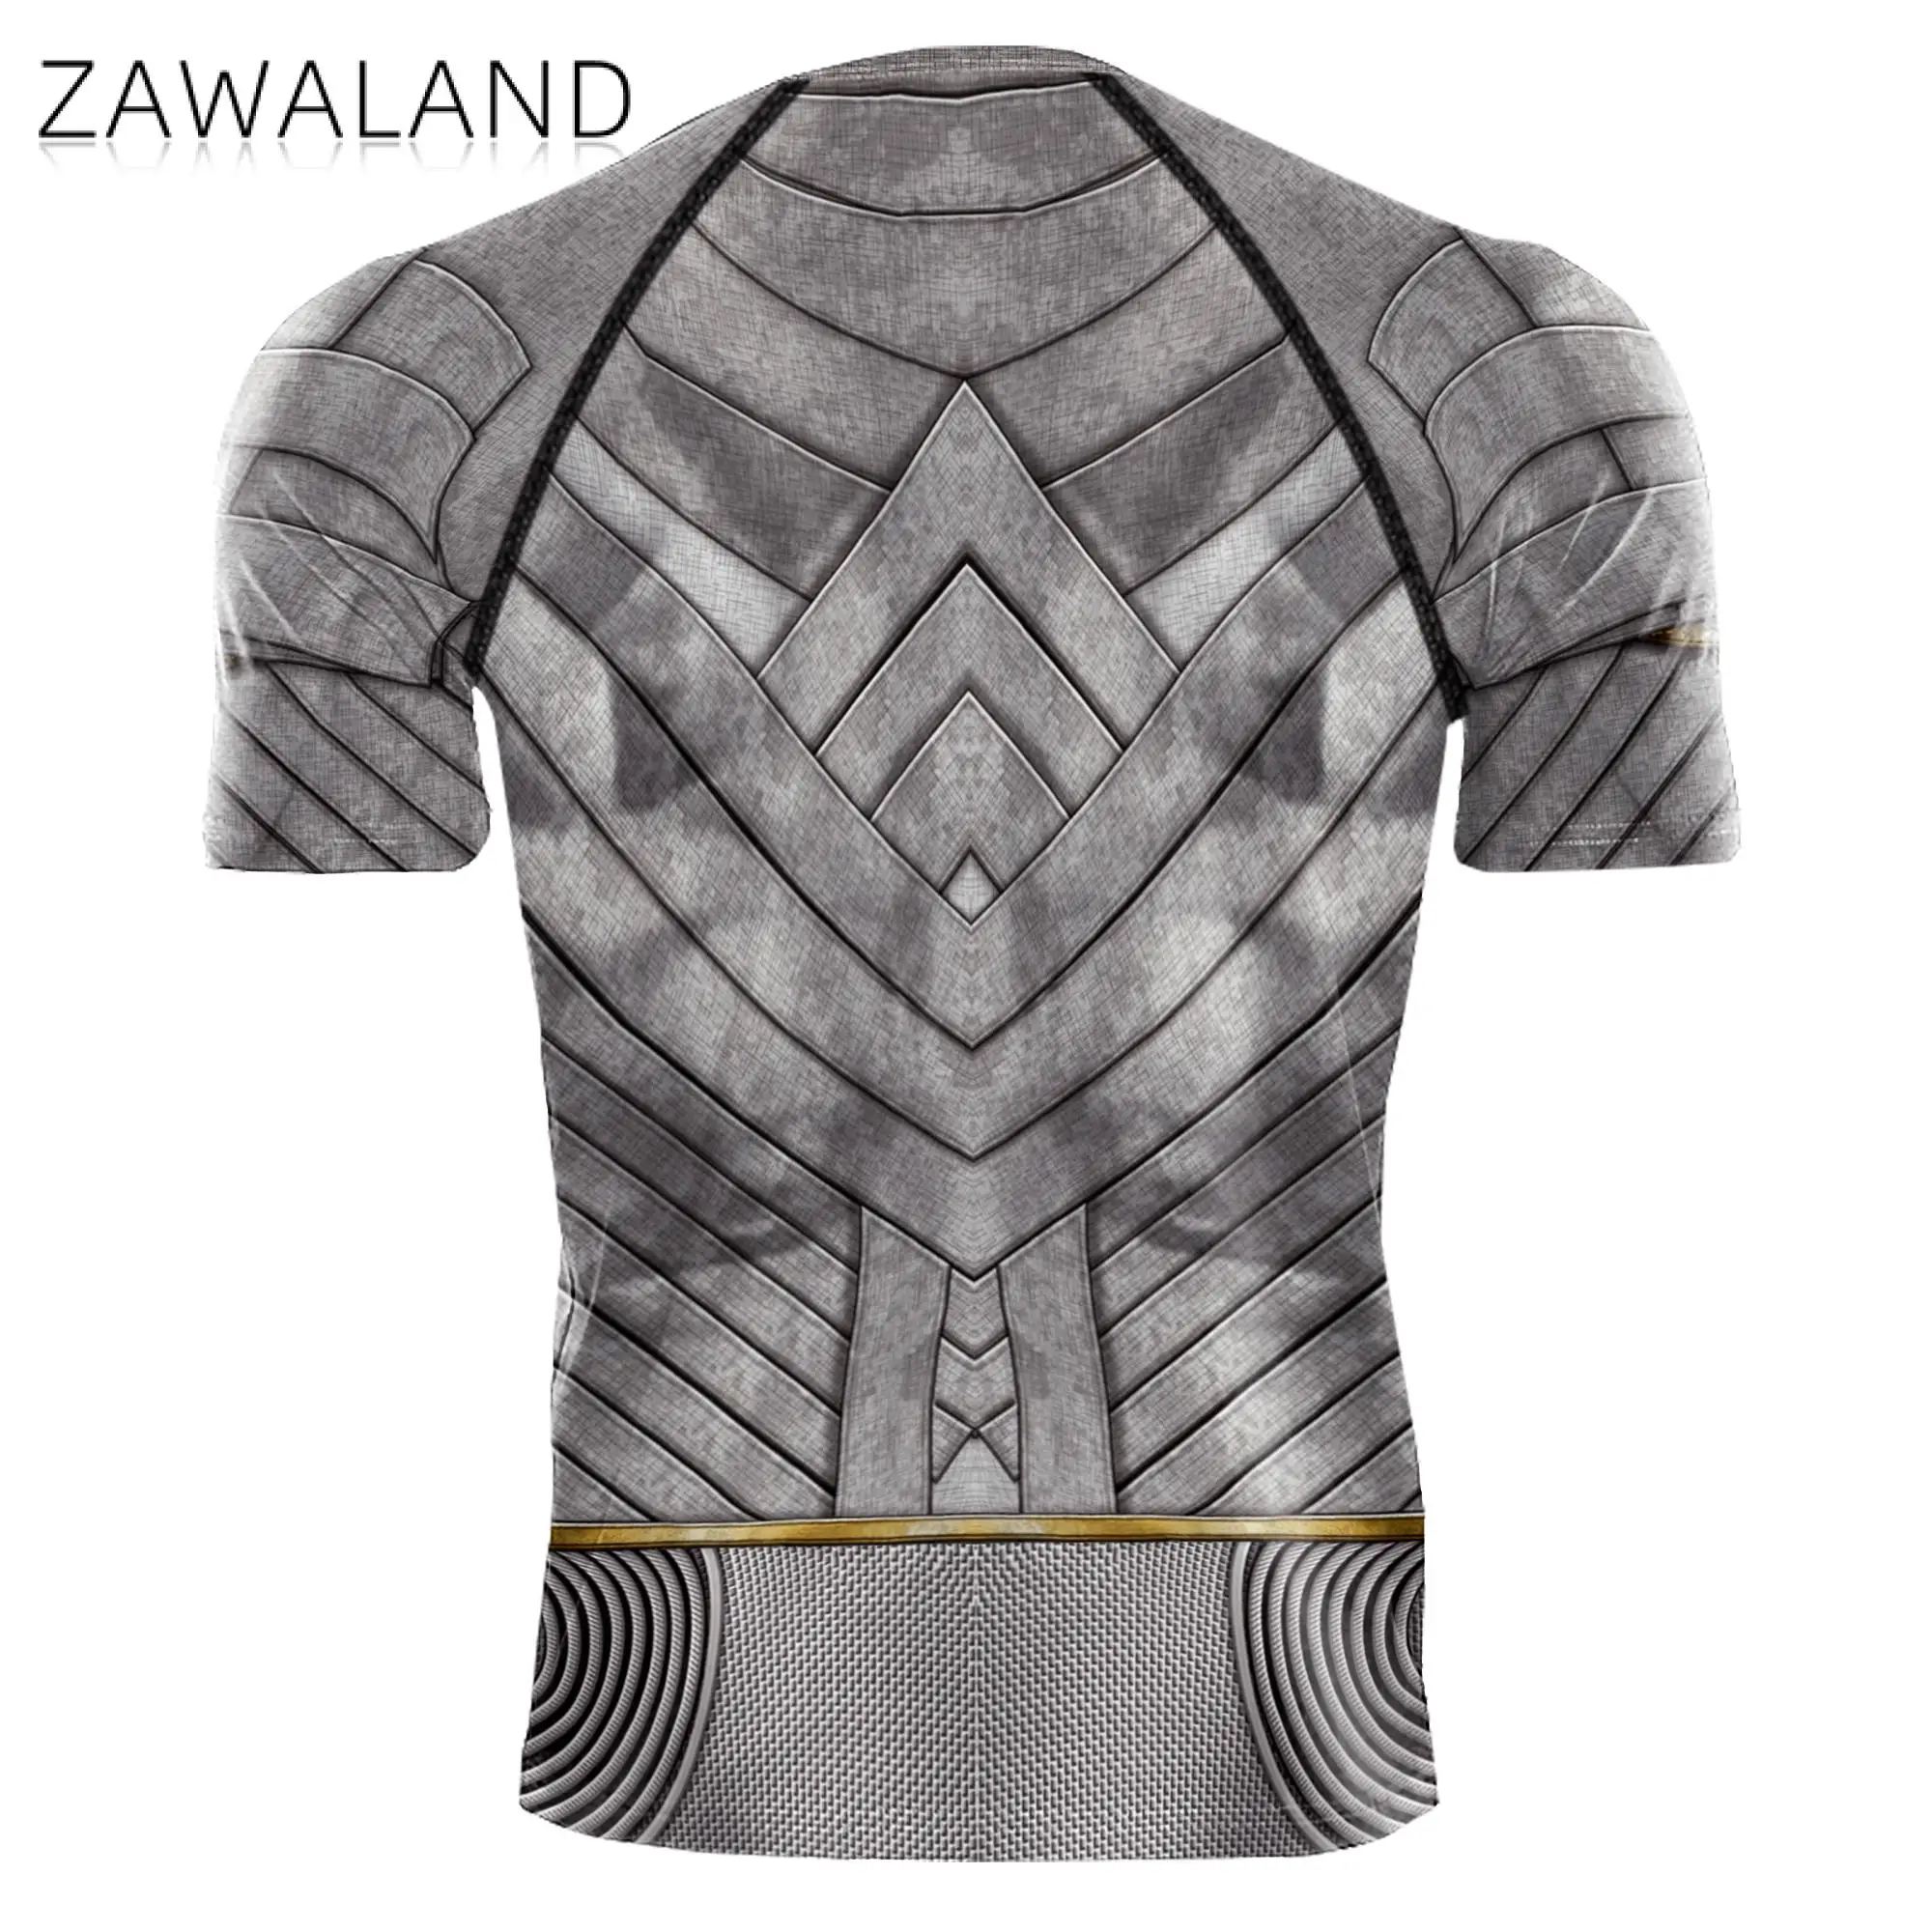 Zawaland Anime movie Moon Knight Cosplay 3D Printed Costume Compression Long Sleeves Workout Gym Sport Shirt Tops Tees images - 6